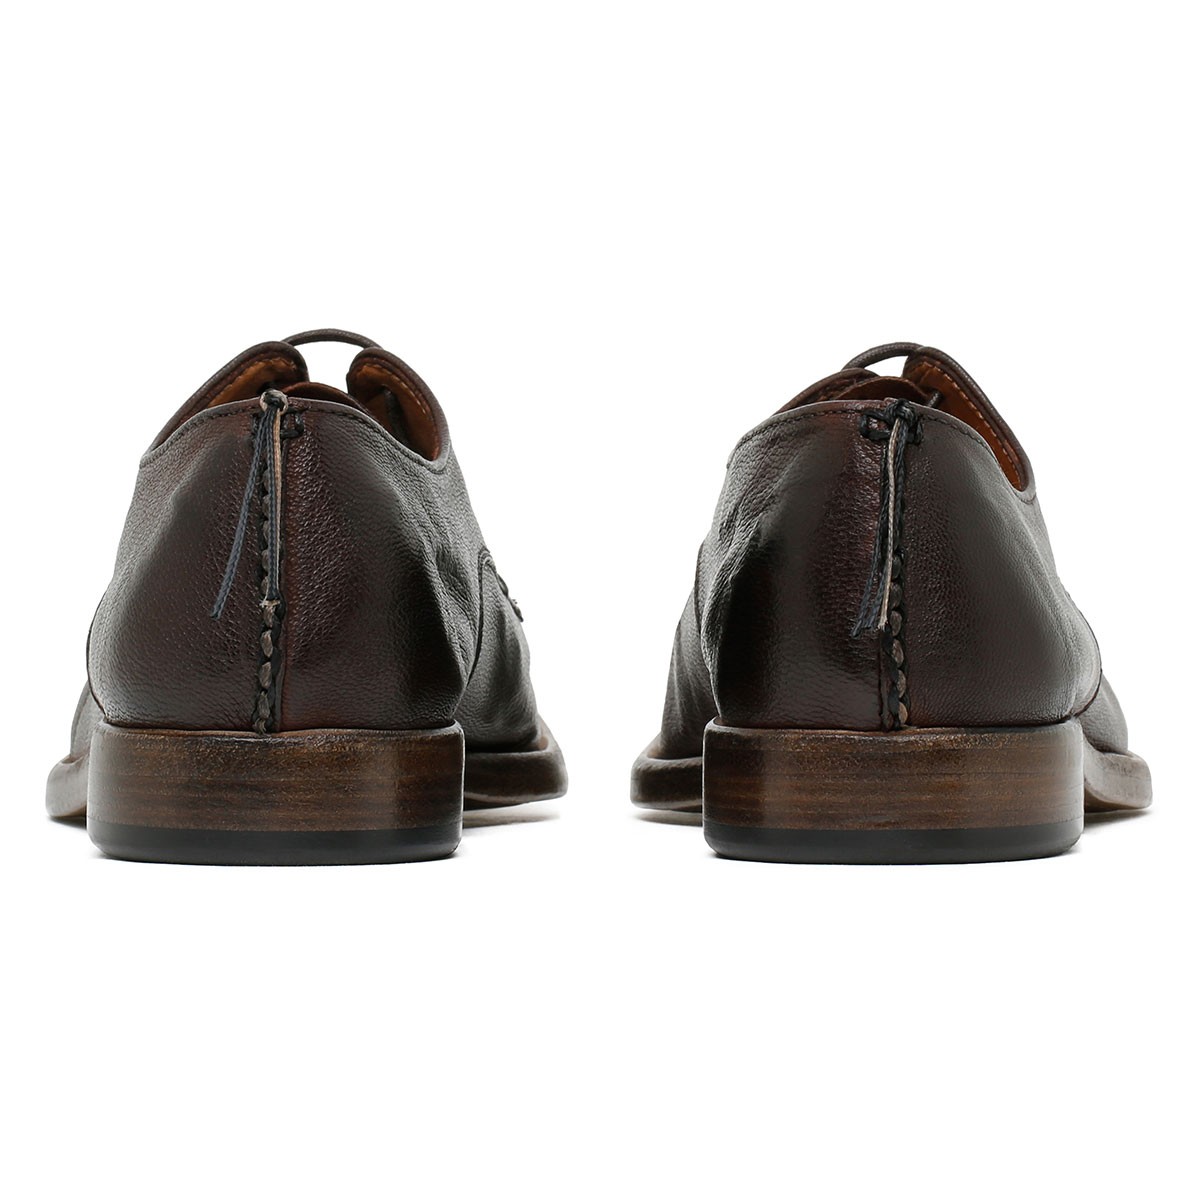 Derby shoes in chocolate Matrix leather